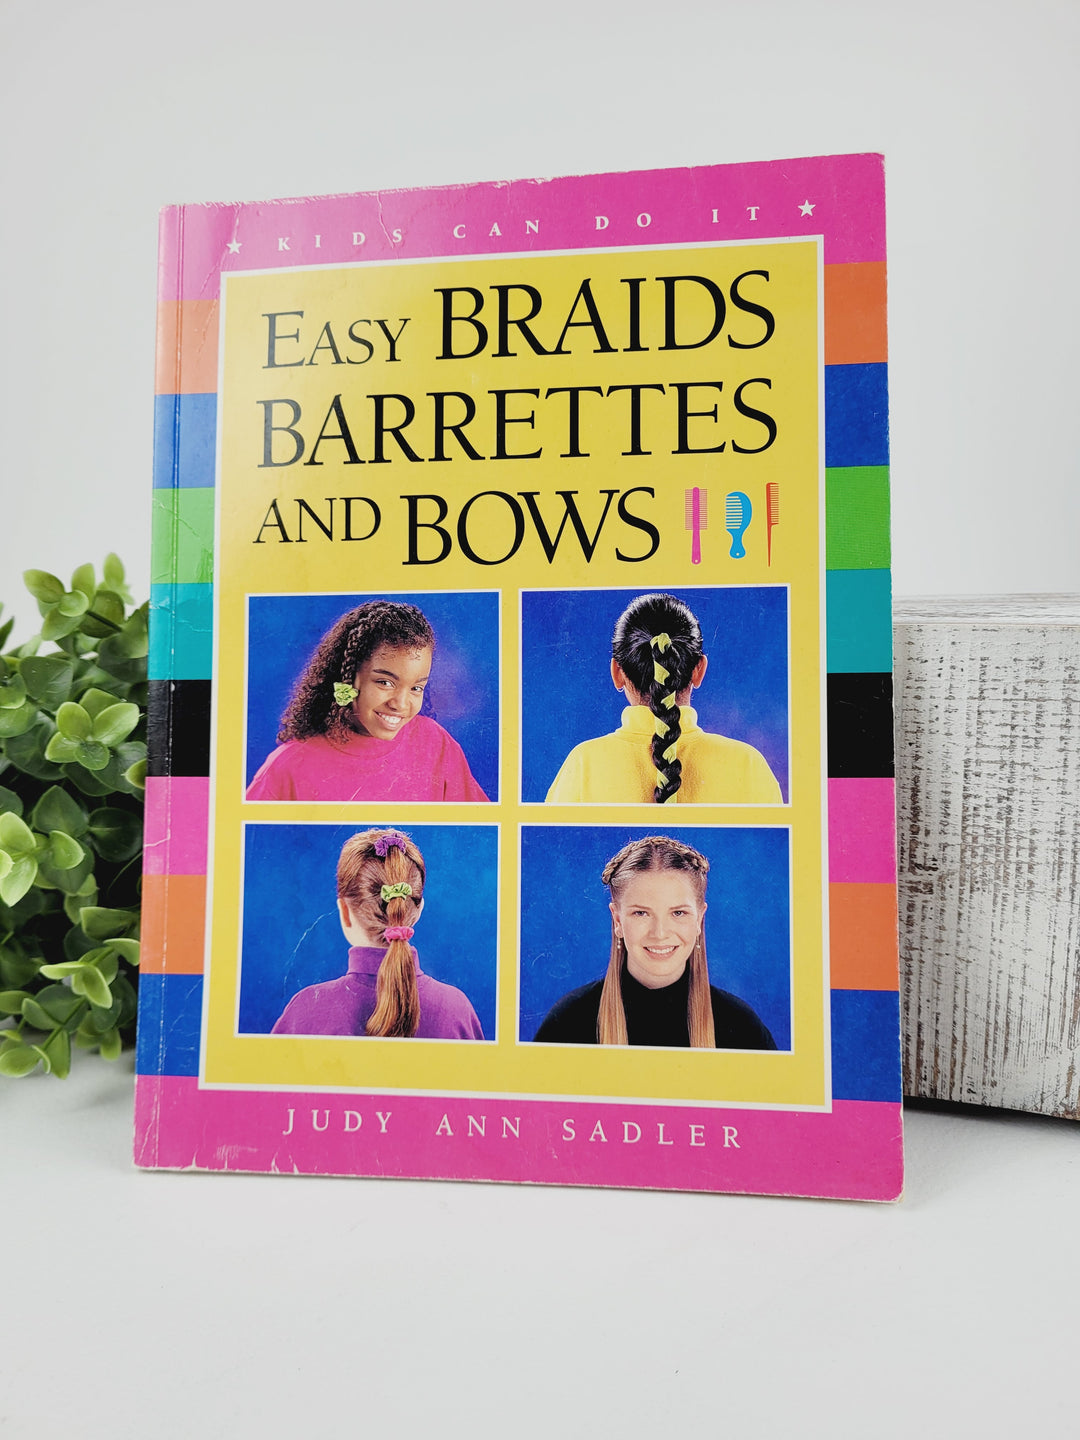 EASY BRAIDS BARRETTES AND BOWS BOOK VGUC